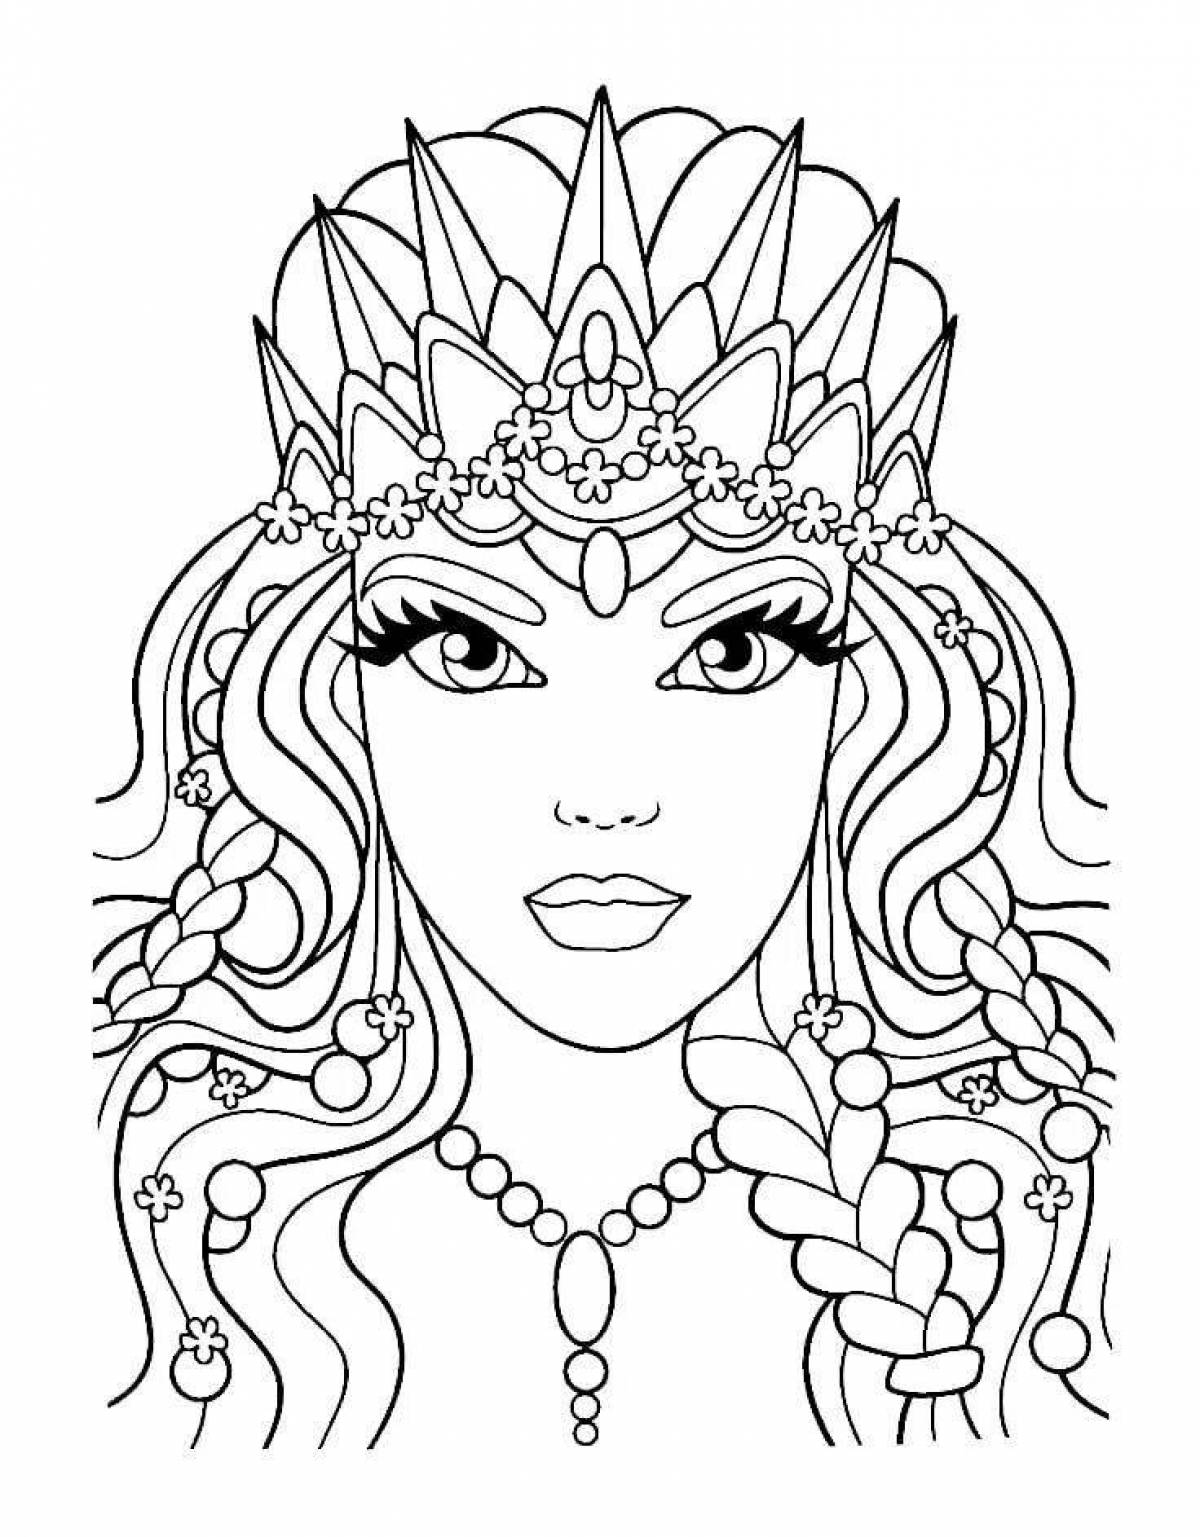 Dazzling coloring book for women